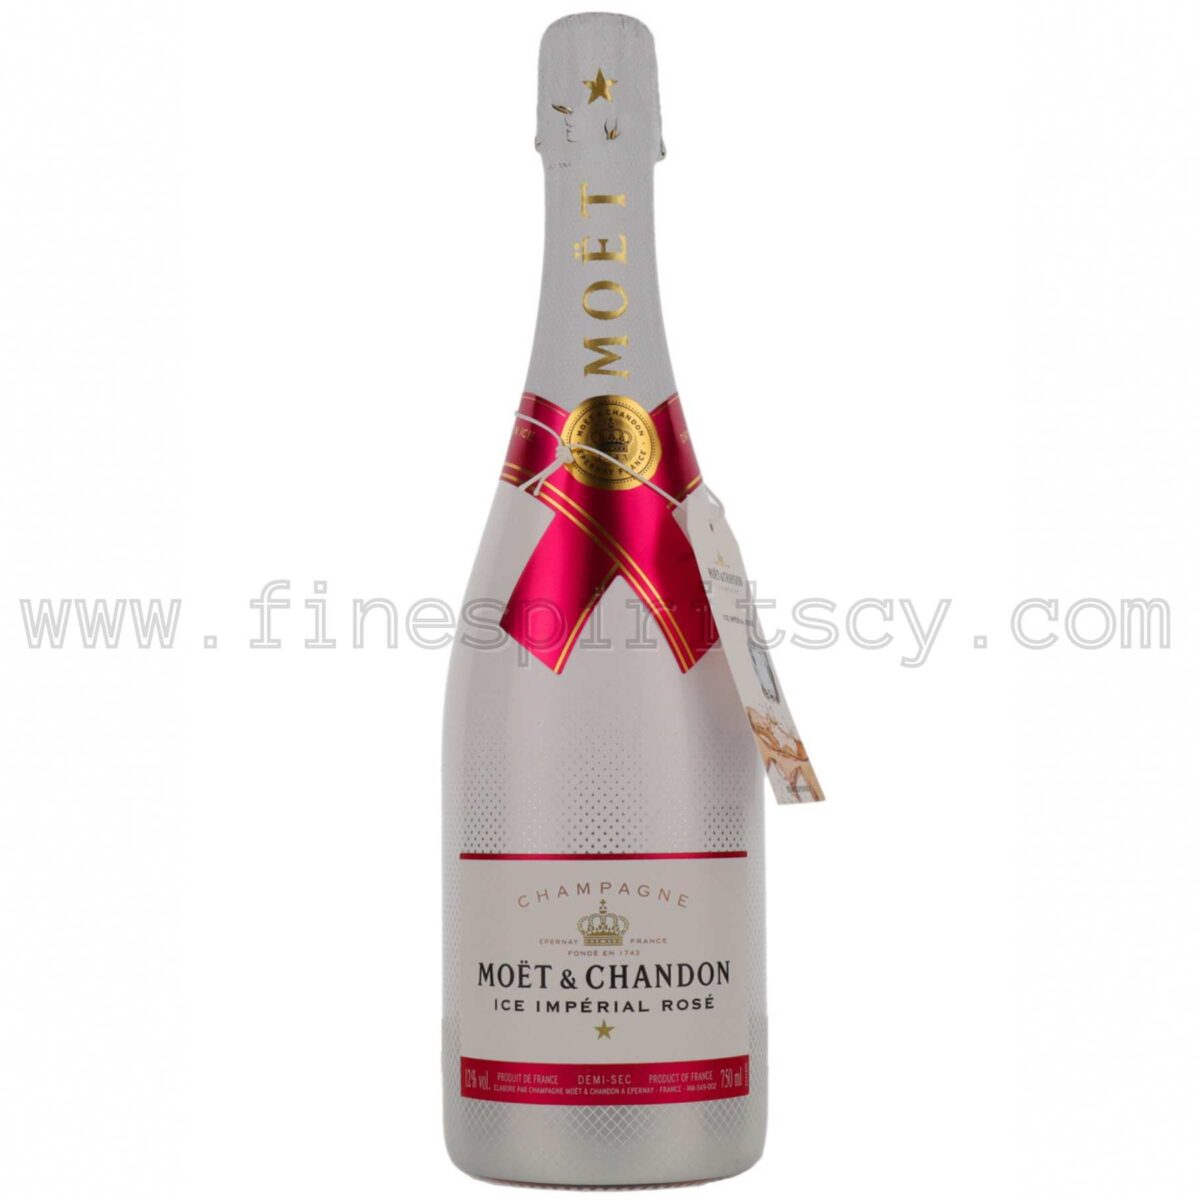 Moet Chandon Rose Ice Imperial 750ml 75cl 0.75L Price Champagne Demi Sec